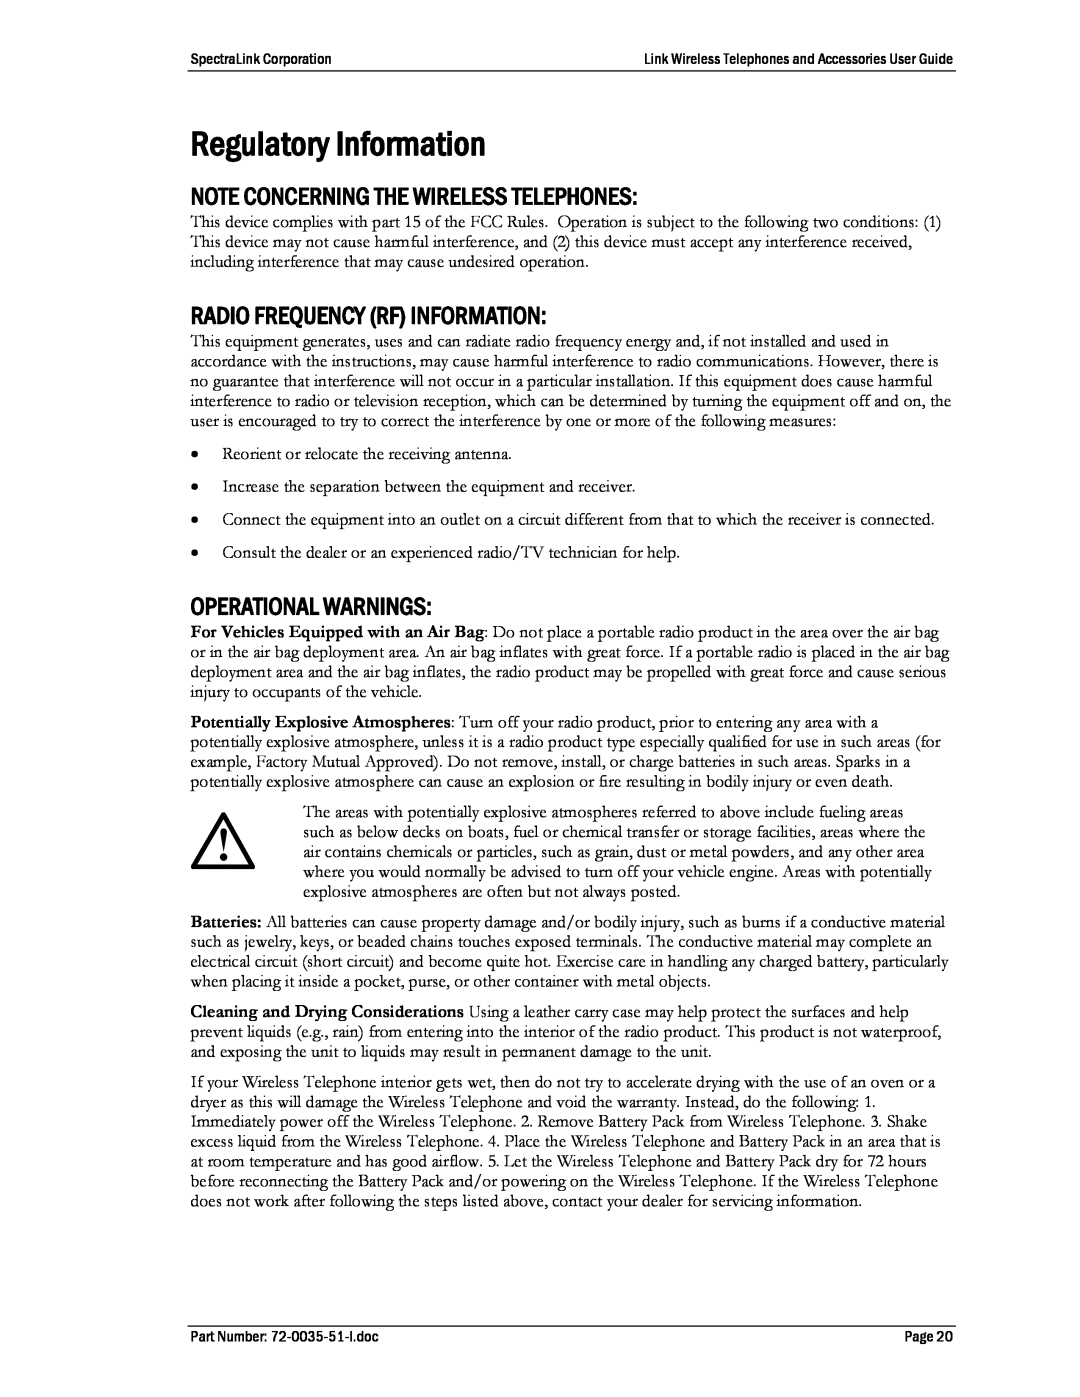 SpectraLink PTB400, 410 Regulatory Information, Note Concerning The Wireless Telephones, Radio Frequency Rf Information 